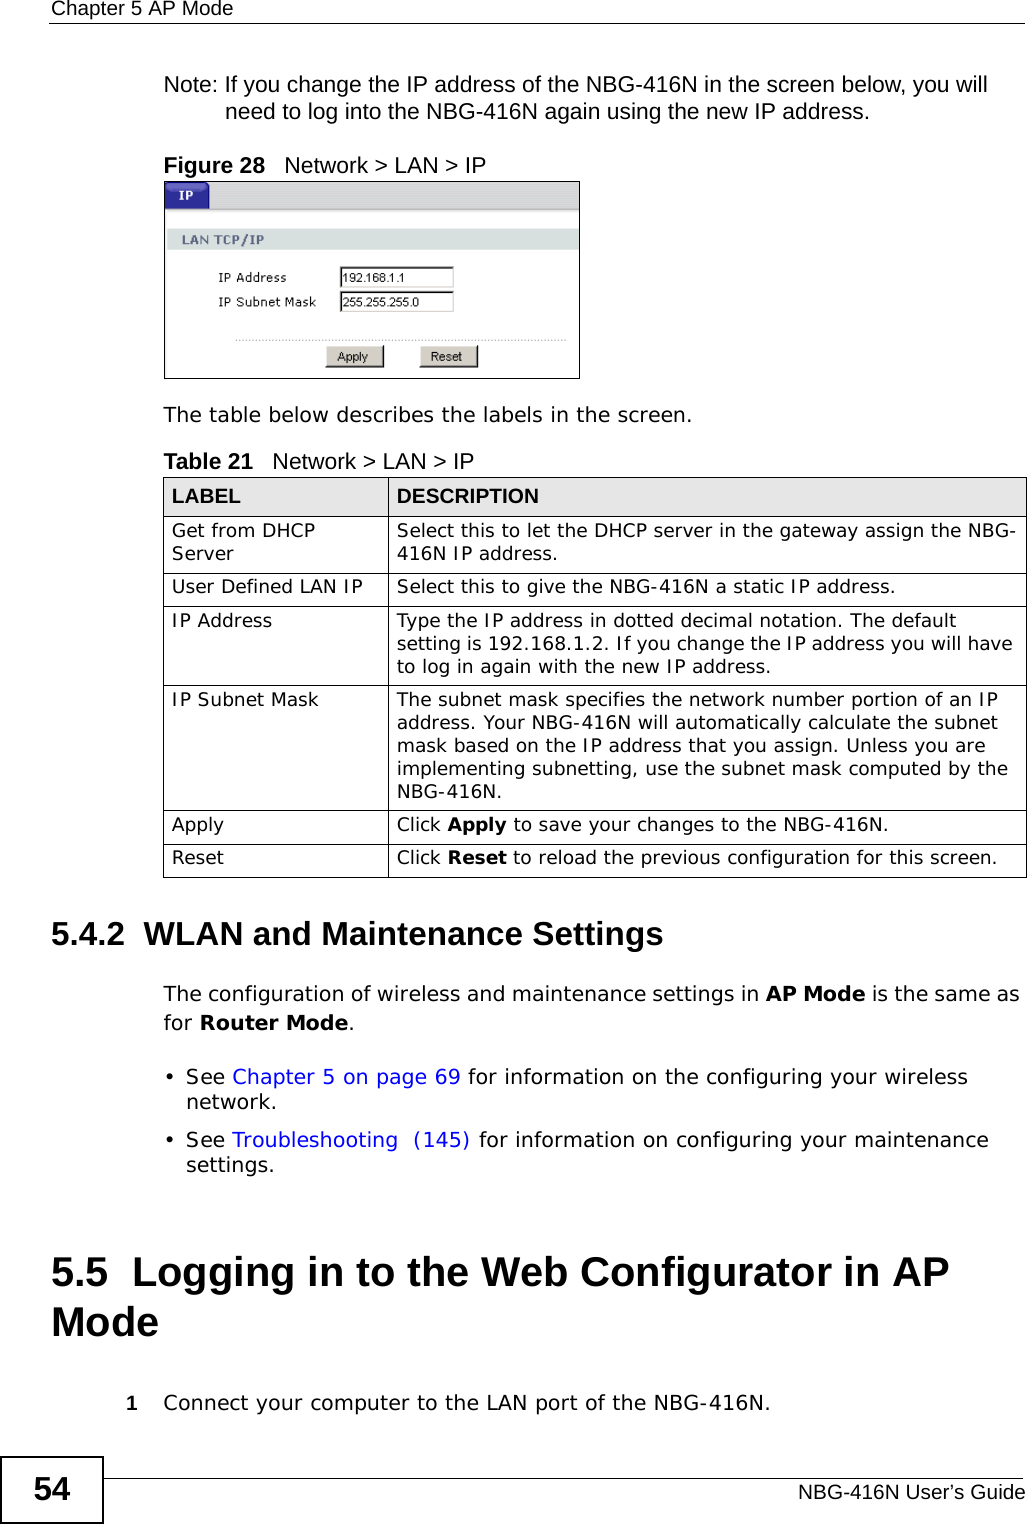 Chapter 5 AP ModeNBG-416N User’s Guide54Note: If you change the IP address of the NBG-416N in the screen below, you will need to log into the NBG-416N again using the new IP address.Figure 28   Network &gt; LAN &gt; IP   The table below describes the labels in the screen.5.4.2  WLAN and Maintenance SettingsThe configuration of wireless and maintenance settings in AP Mode is the same as for Router Mode.• See Chapter 5 on page 69 for information on the configuring your wireless network.• See Troubleshooting  (145) for information on configuring your maintenance settings. 5.5  Logging in to the Web Configurator in AP Mode1Connect your computer to the LAN port of the NBG-416N. Table 21   Network &gt; LAN &gt; IPLABEL DESCRIPTIONGet from DHCP Server Select this to let the DHCP server in the gateway assign the NBG-416N IP address.User Defined LAN IP Select this to give the NBG-416N a static IP address.IP Address Type the IP address in dotted decimal notation. The default setting is 192.168.1.2. If you change the IP address you will have to log in again with the new IP address. IP Subnet Mask The subnet mask specifies the network number portion of an IP address. Your NBG-416N will automatically calculate the subnet mask based on the IP address that you assign. Unless you are implementing subnetting, use the subnet mask computed by the NBG-416N.Apply Click Apply to save your changes to the NBG-416N.Reset Click Reset to reload the previous configuration for this screen.